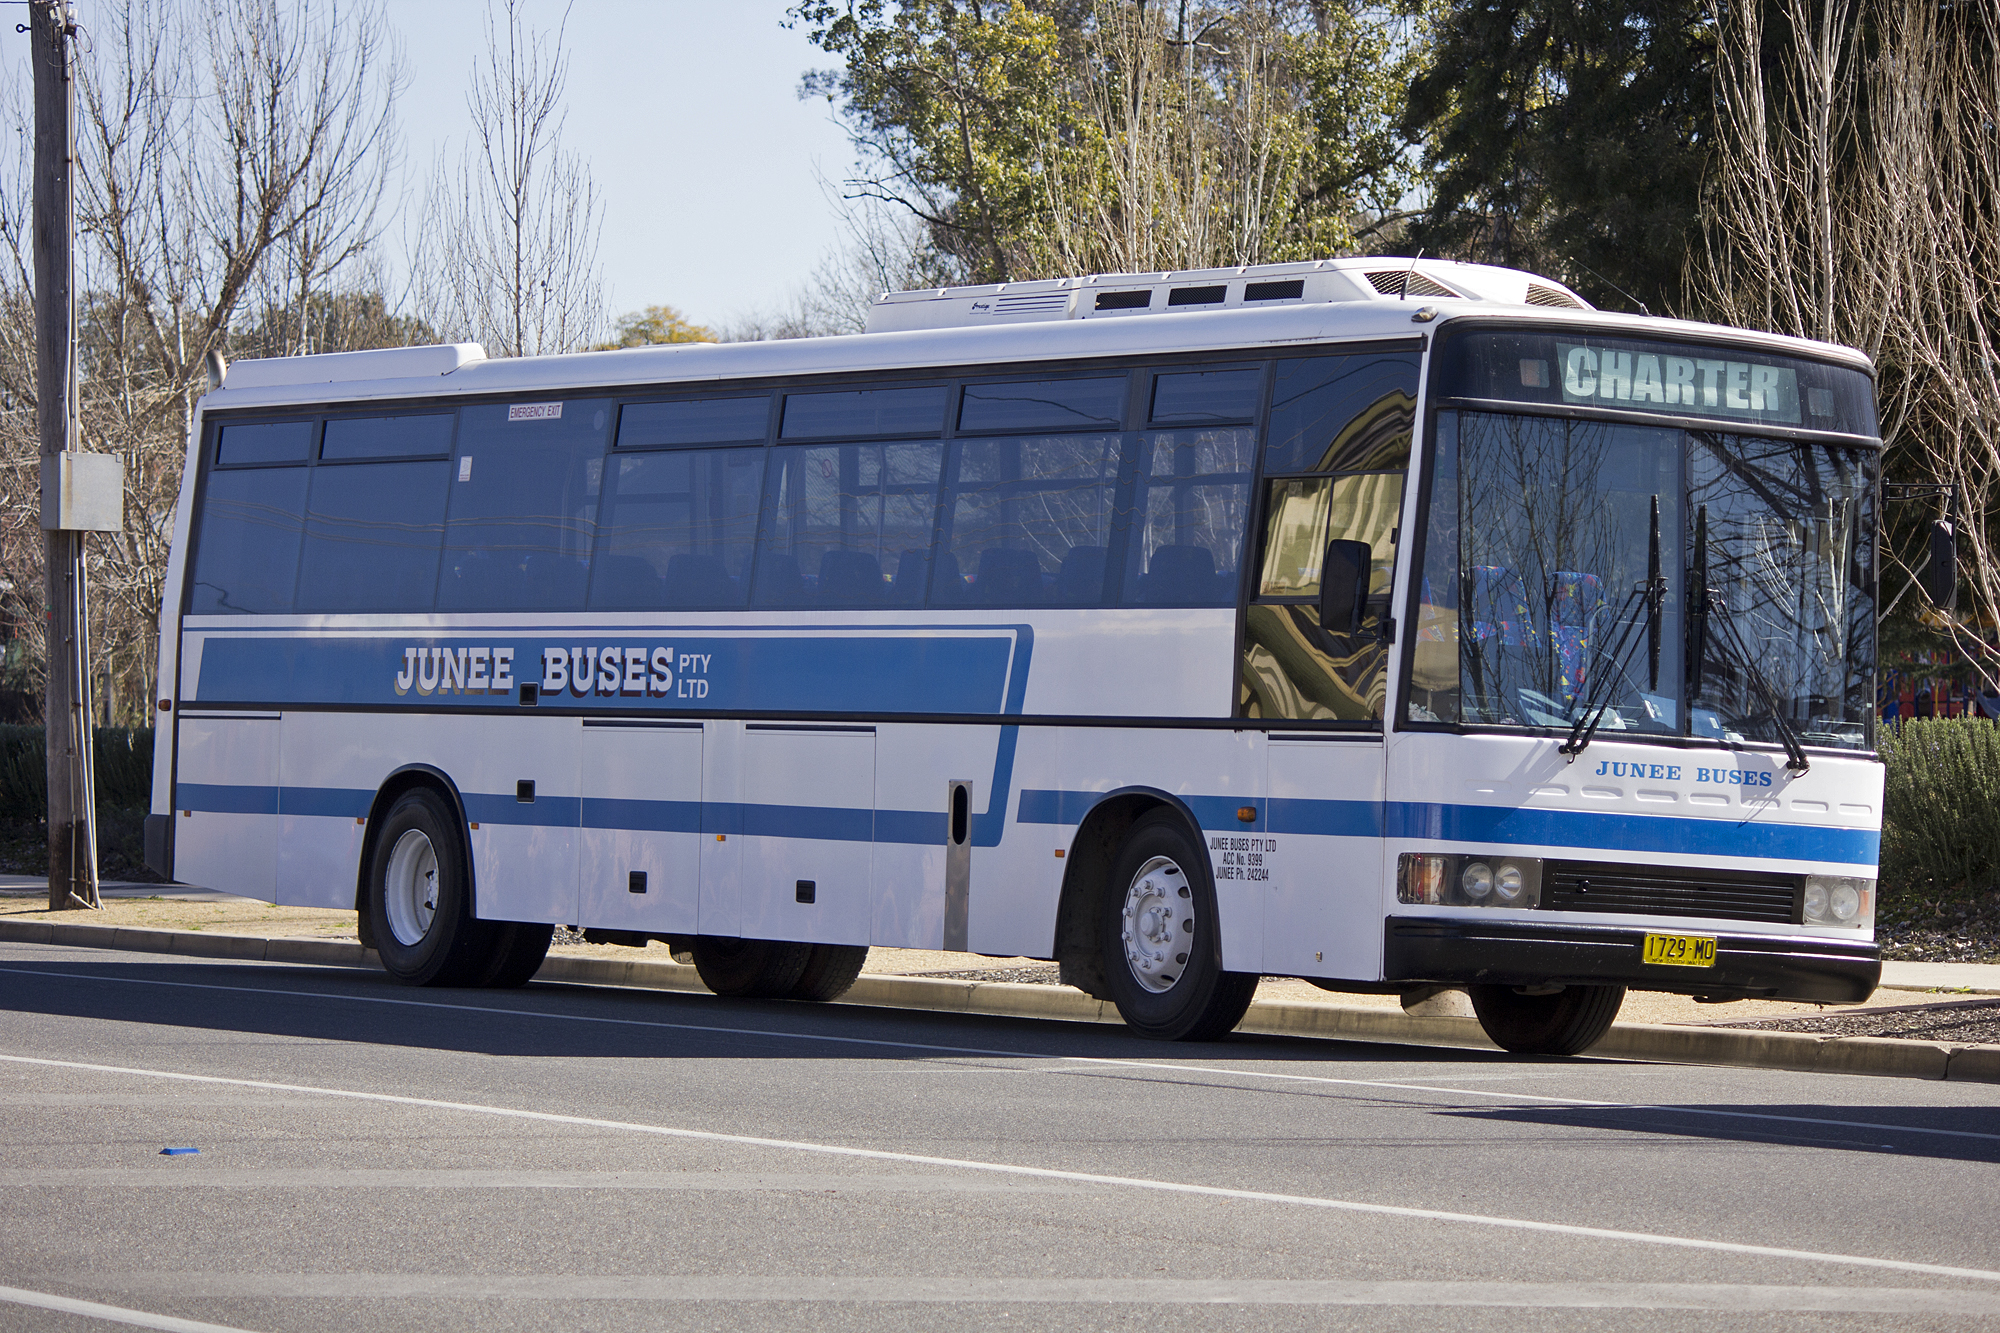 Junee_Buses_PMCA_'XL'_bodied_Hino_RG197K_parked_in_a_bus_stop_on_Morrow_Street_in_Wagga_Wagga.jpg